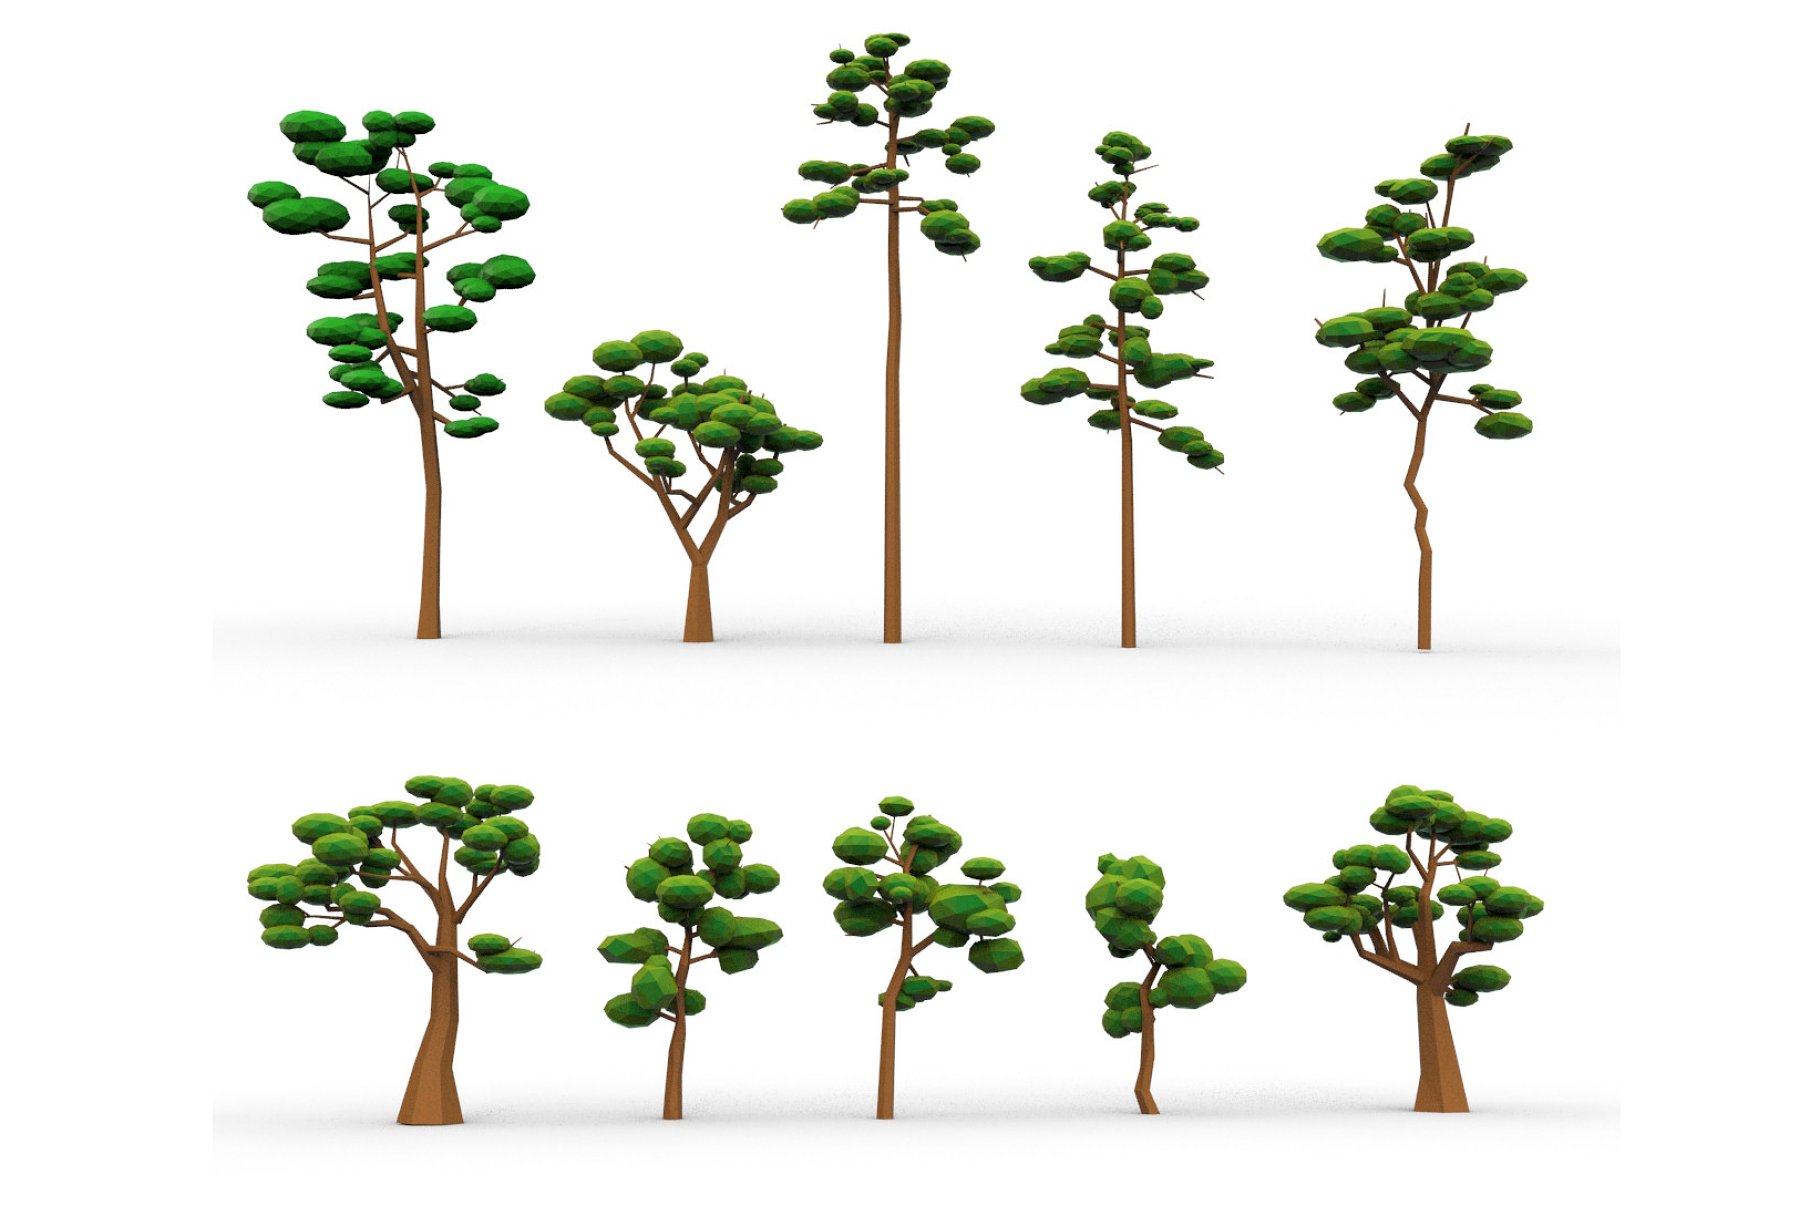 Images of different types of trees.